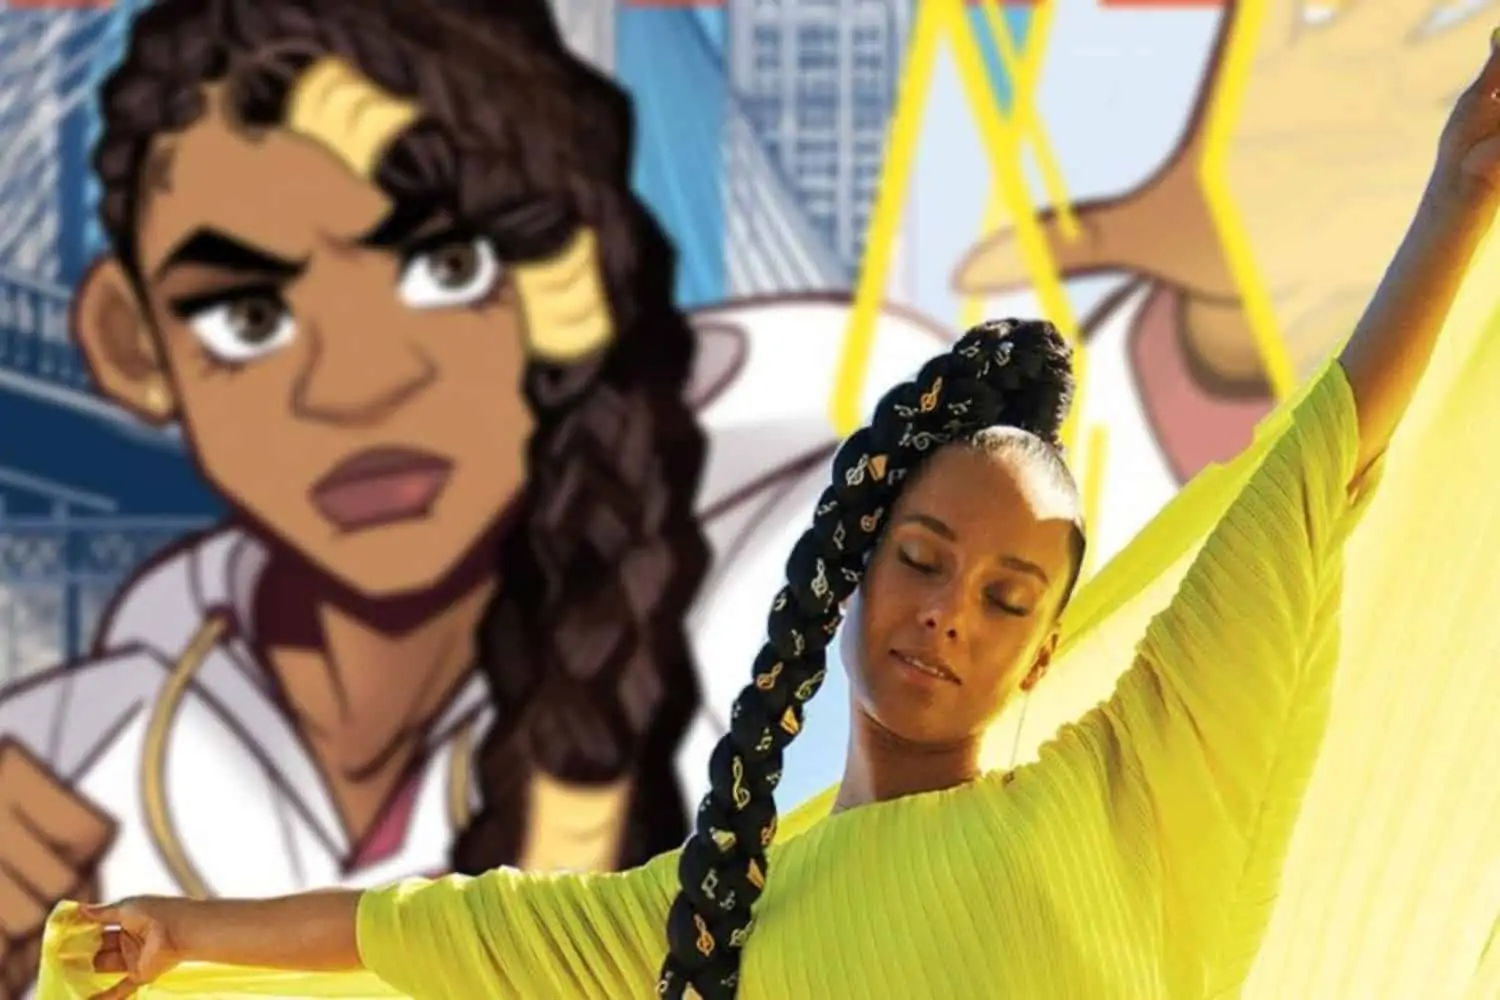 Alicia Keys is releasing a graphic novel - "Girl on Fire"